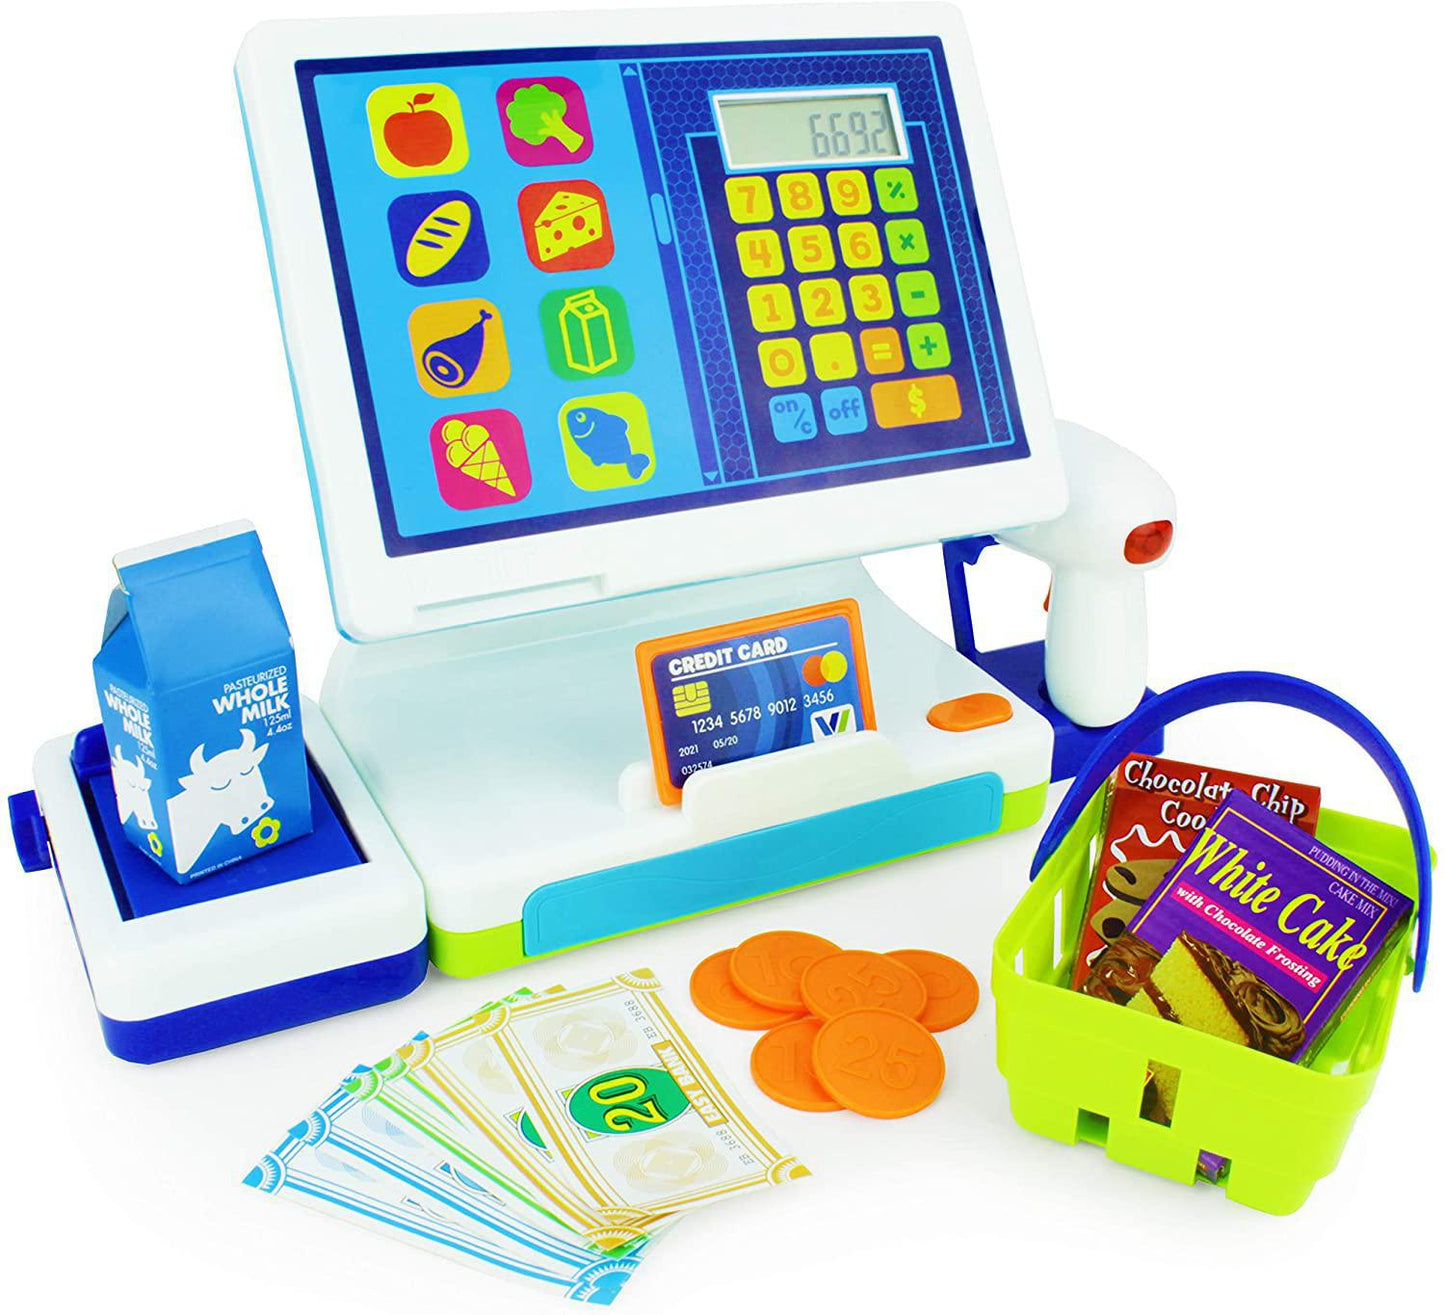 Tablet Cash Register Toy - Cashier Station with Calculator, Play Scanner and Credit Card Reader, Play Food, Pretend Money